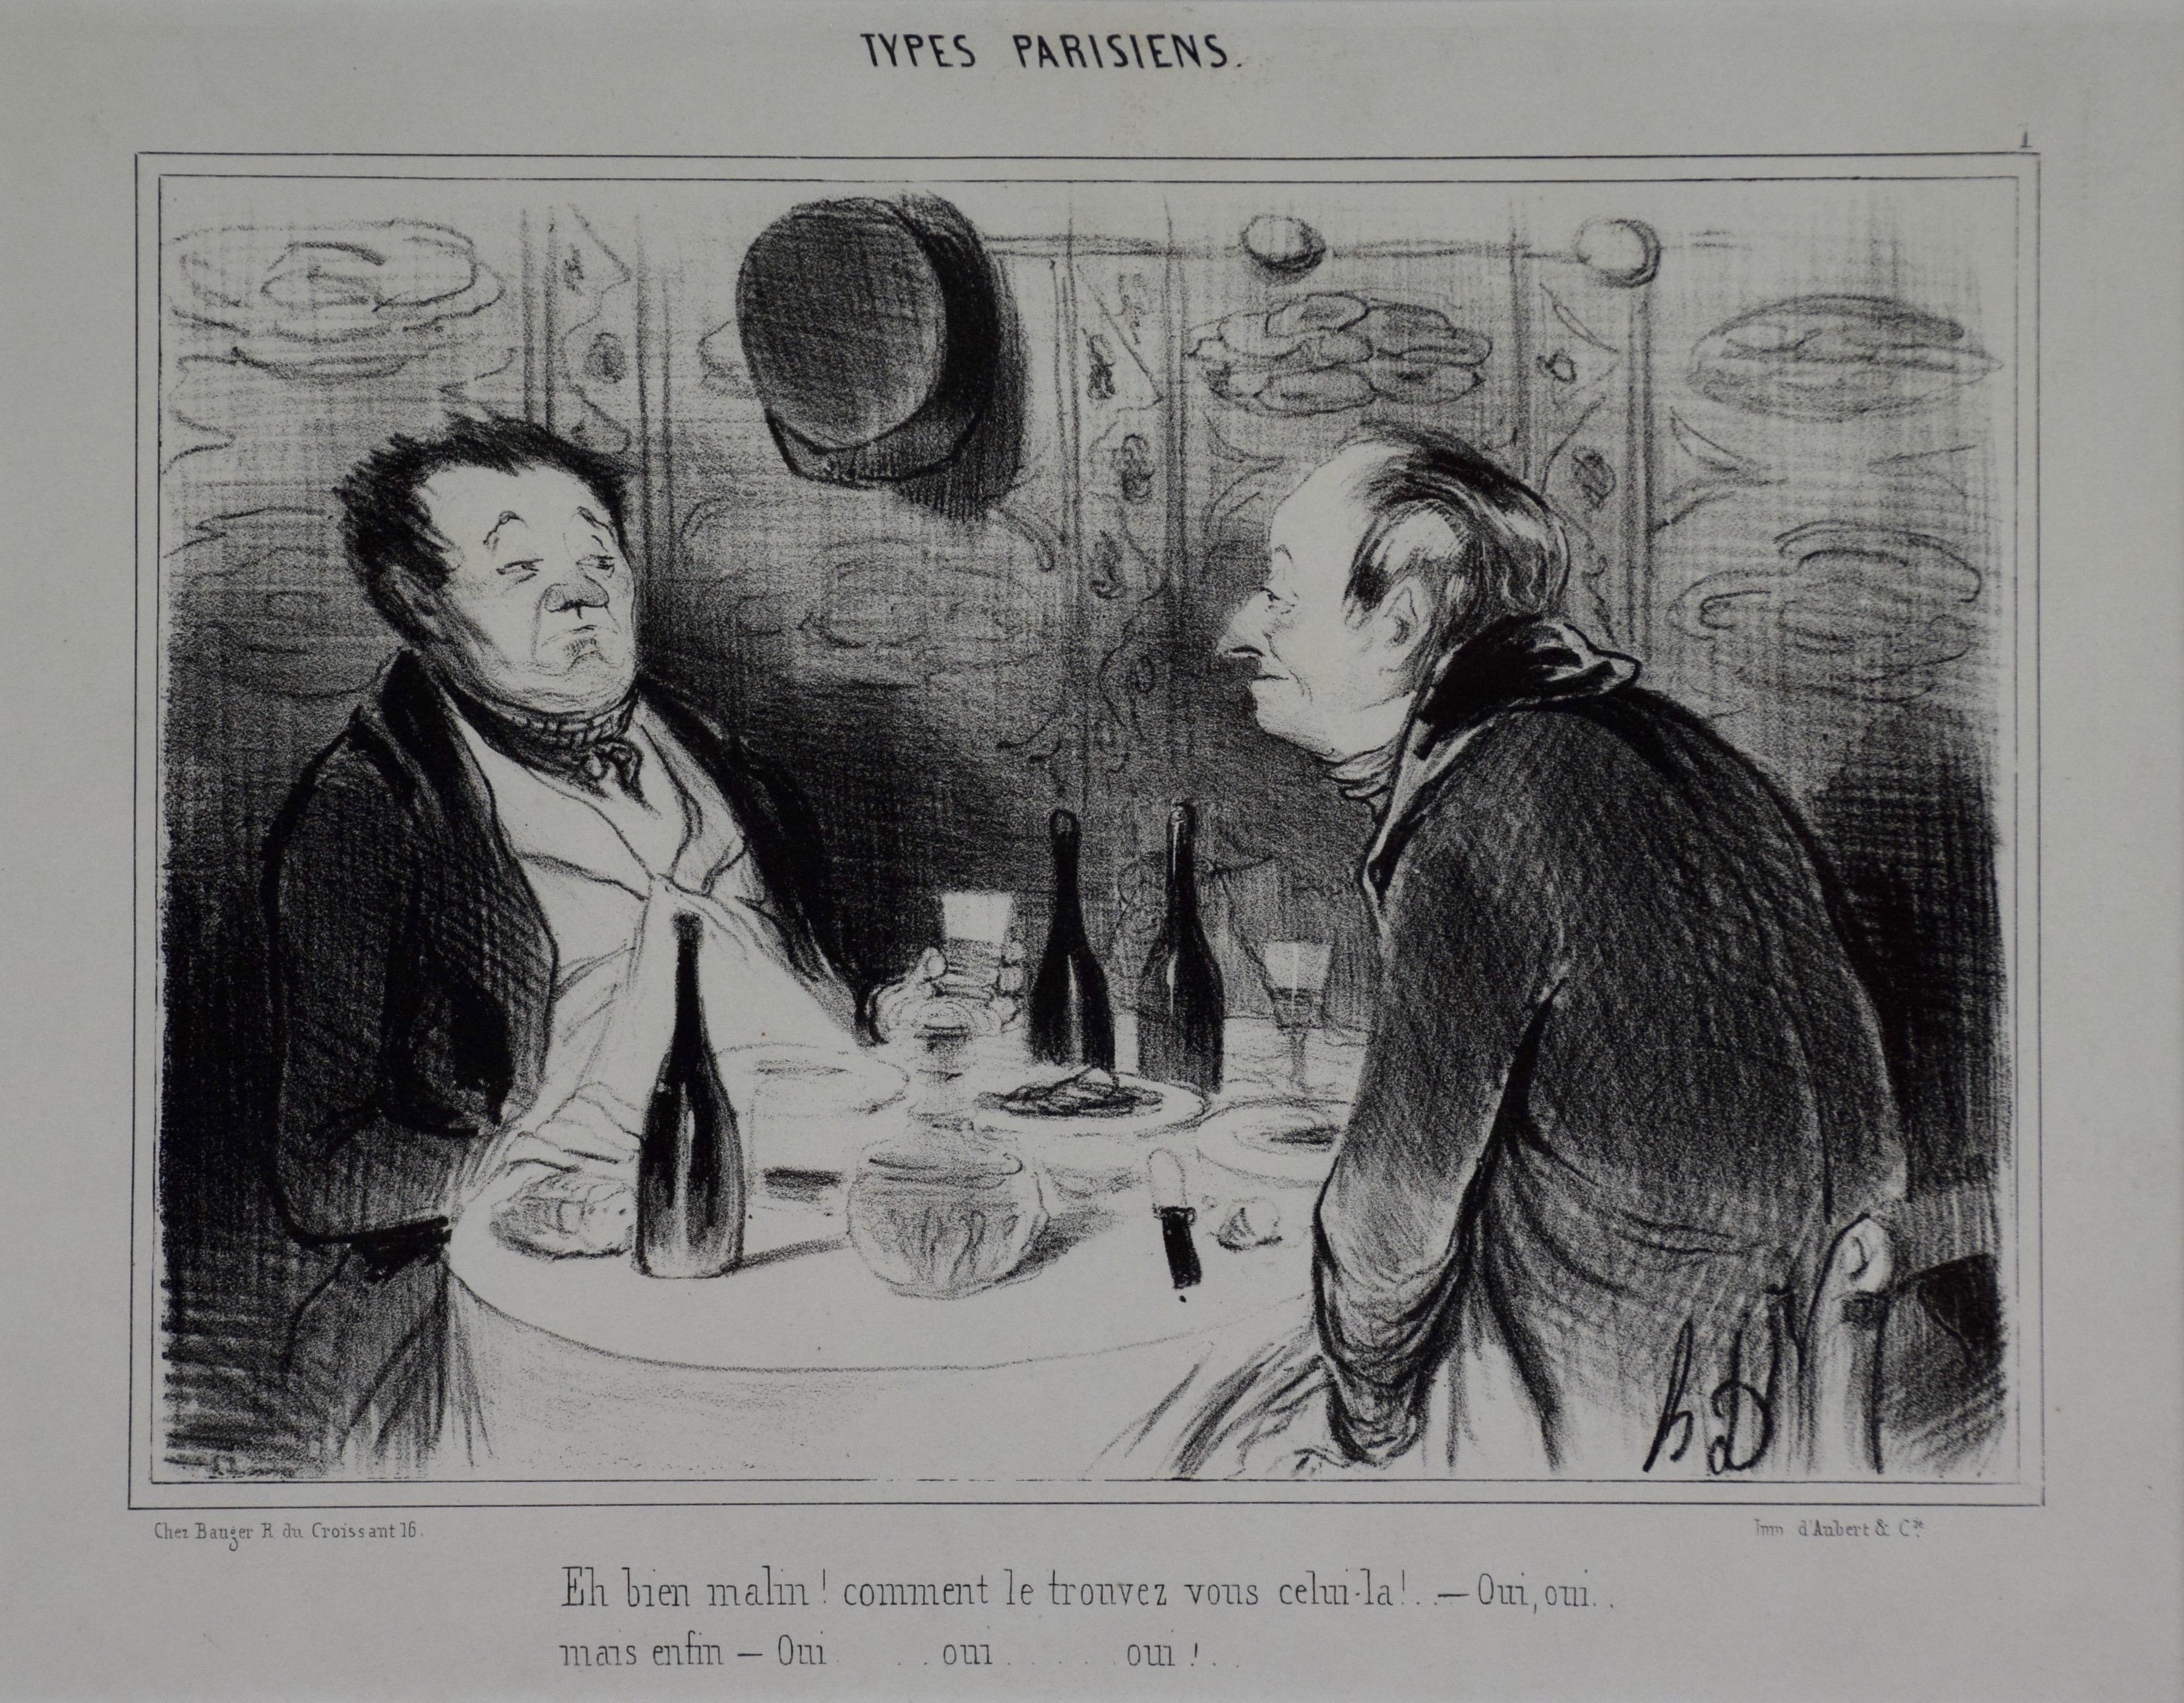 Daumier Satirical Lithograph Depicting French Men Tasting and Critiquing Wine - Print by Honoré Daumier